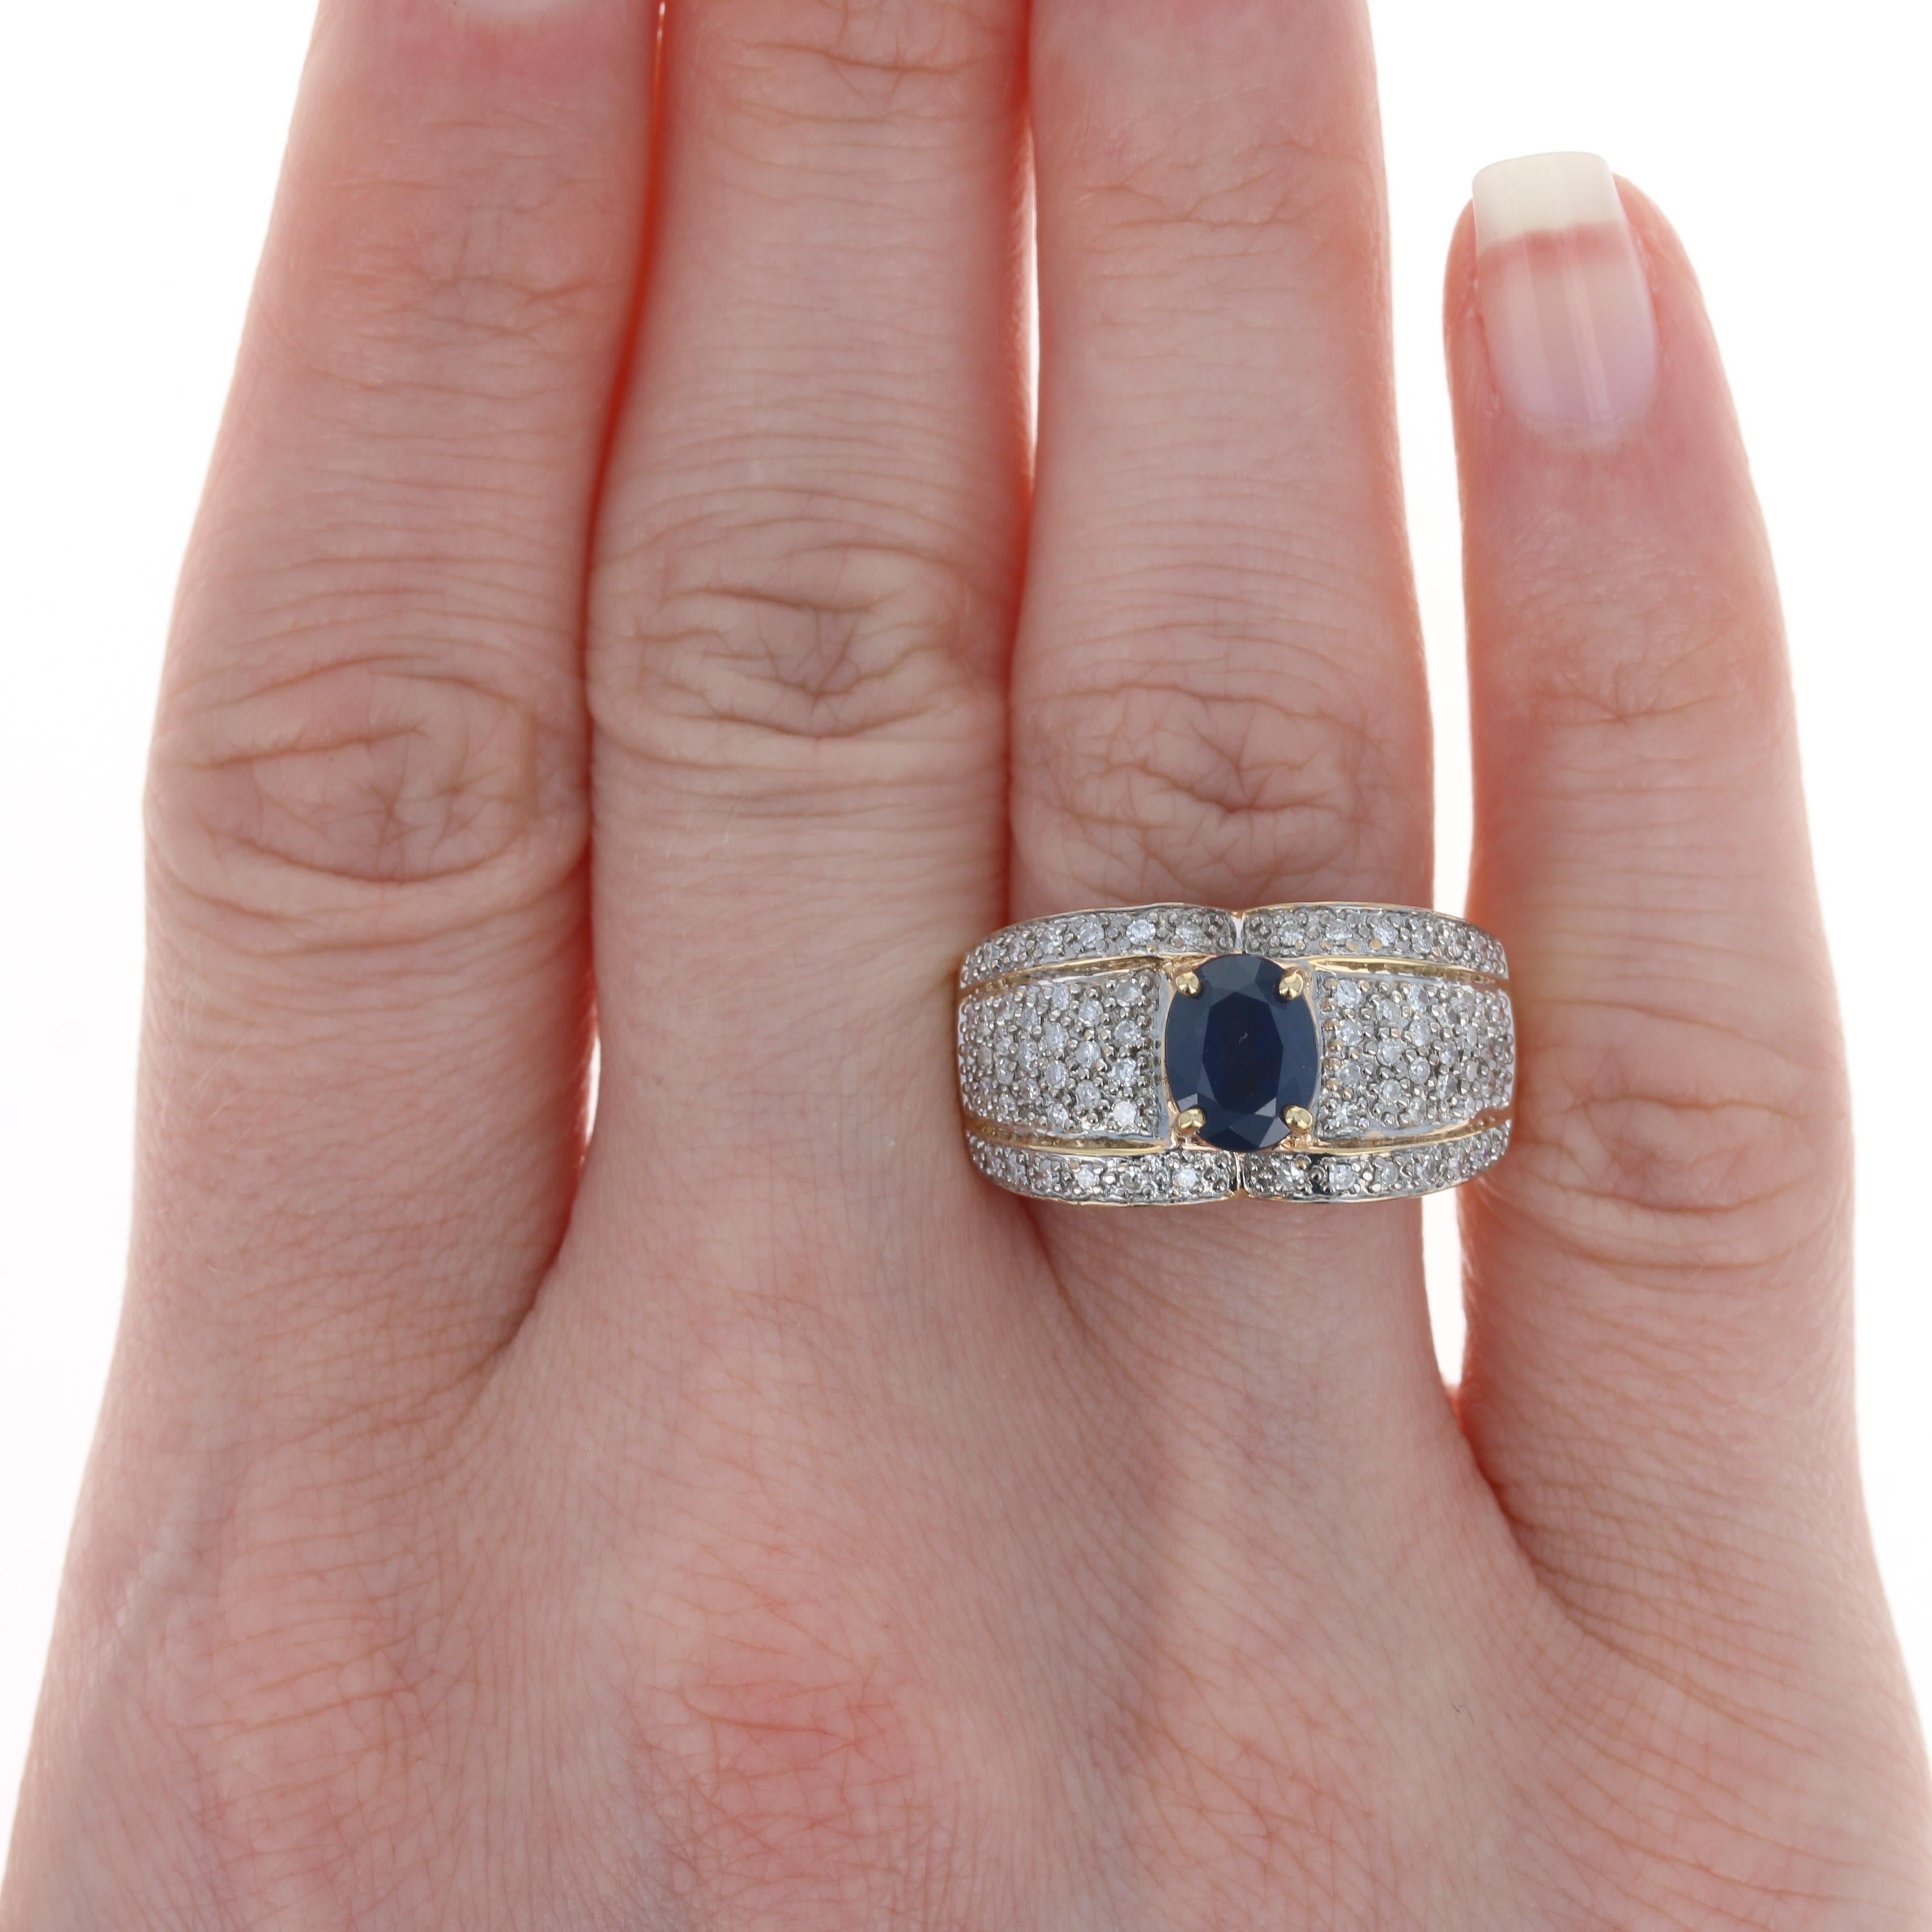 Get ready to dazzle wearing this show-stopping ring with your formal attire! Composed of 14k yellow and white gold, this piece features a majestic blue sapphire solitaire beautifully accompanied by a shimmering array of icy white diamond accents